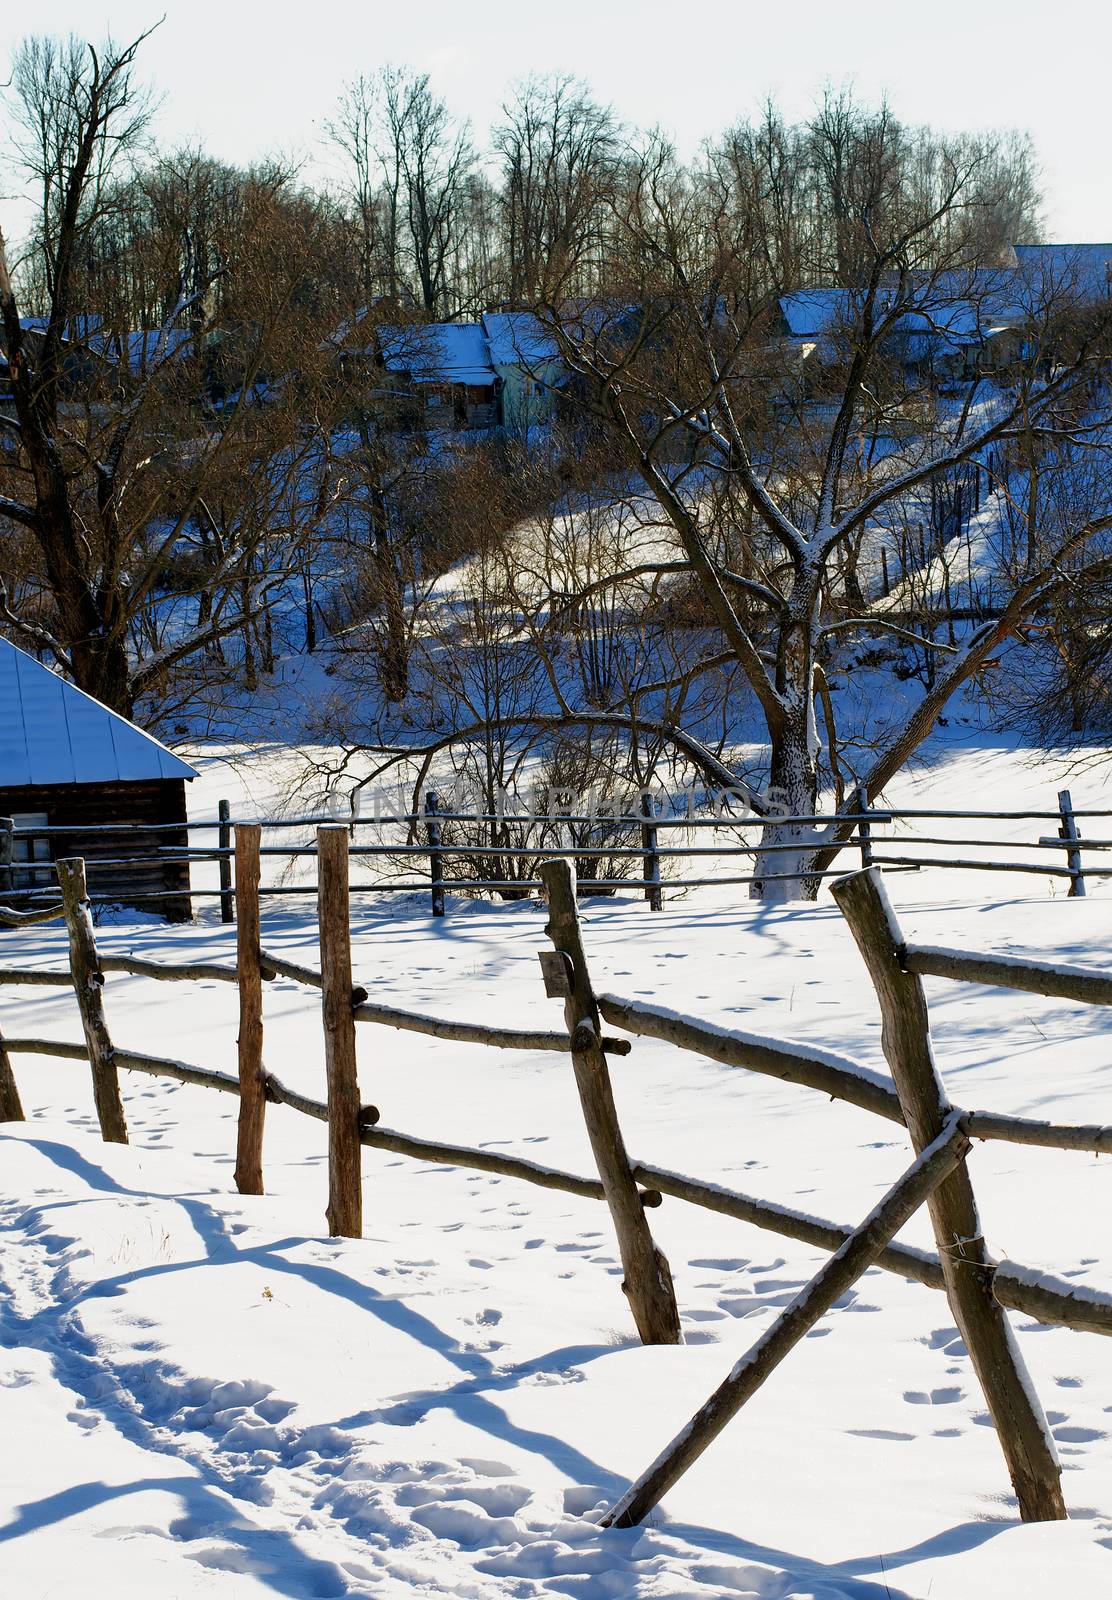 Rustic Winter Landscape in Old Village with Wooden Fence on Big Old Trees and Snow Field background Outdoors